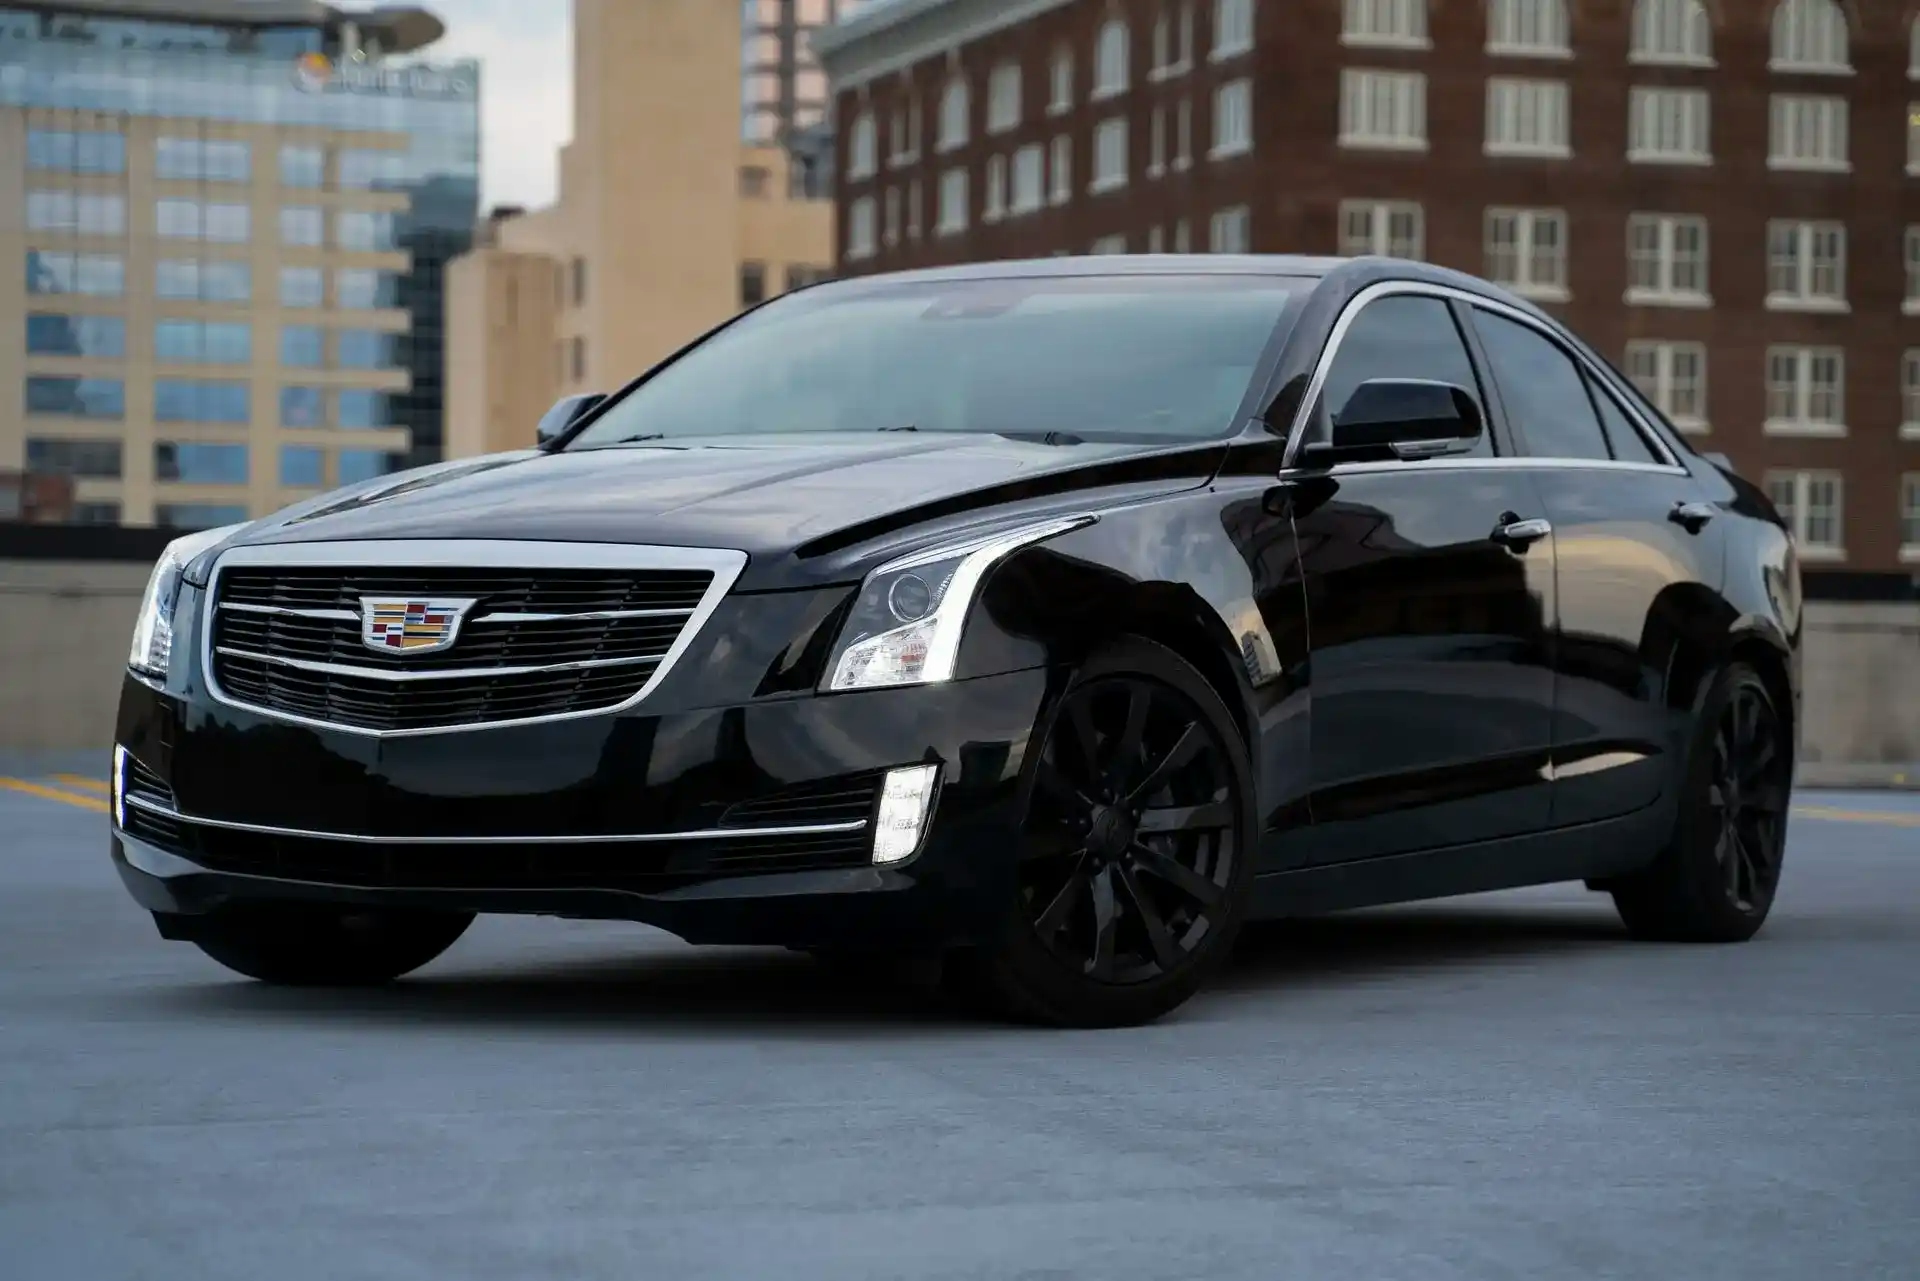 /static/images/chiptuning/types/brands/cadillac illustration